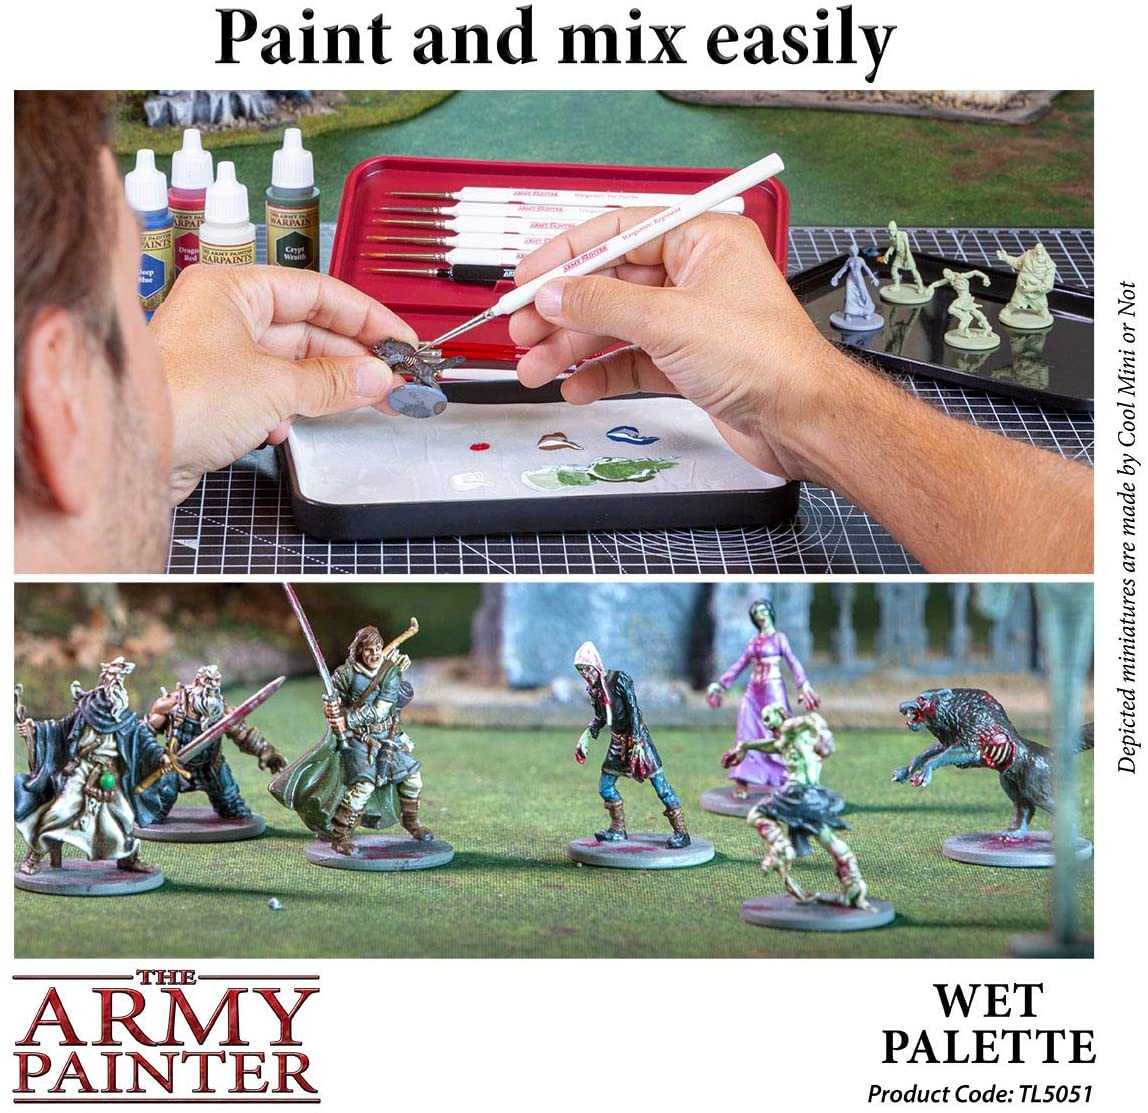 ARMY PAINTER: WET PALETTE | BD Cosmos